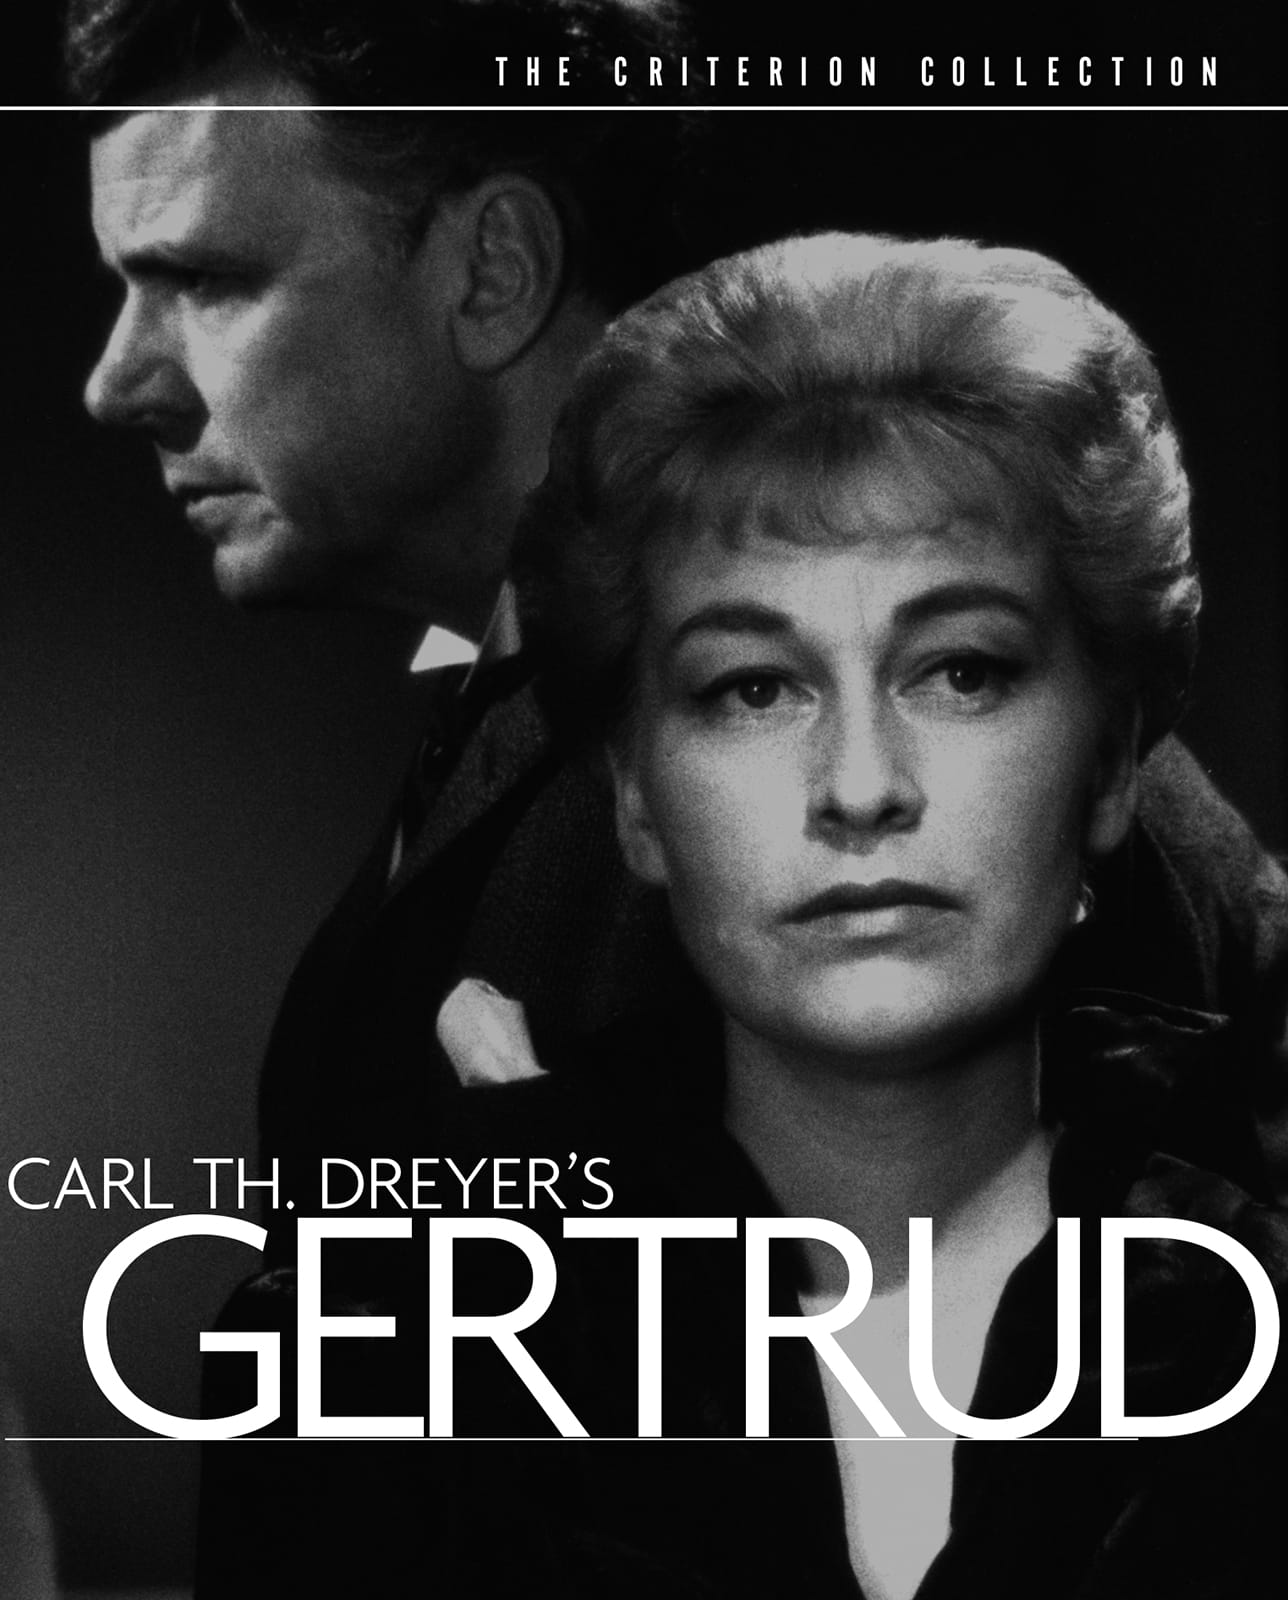 Daily Movie Selection: Gertrud (1964)